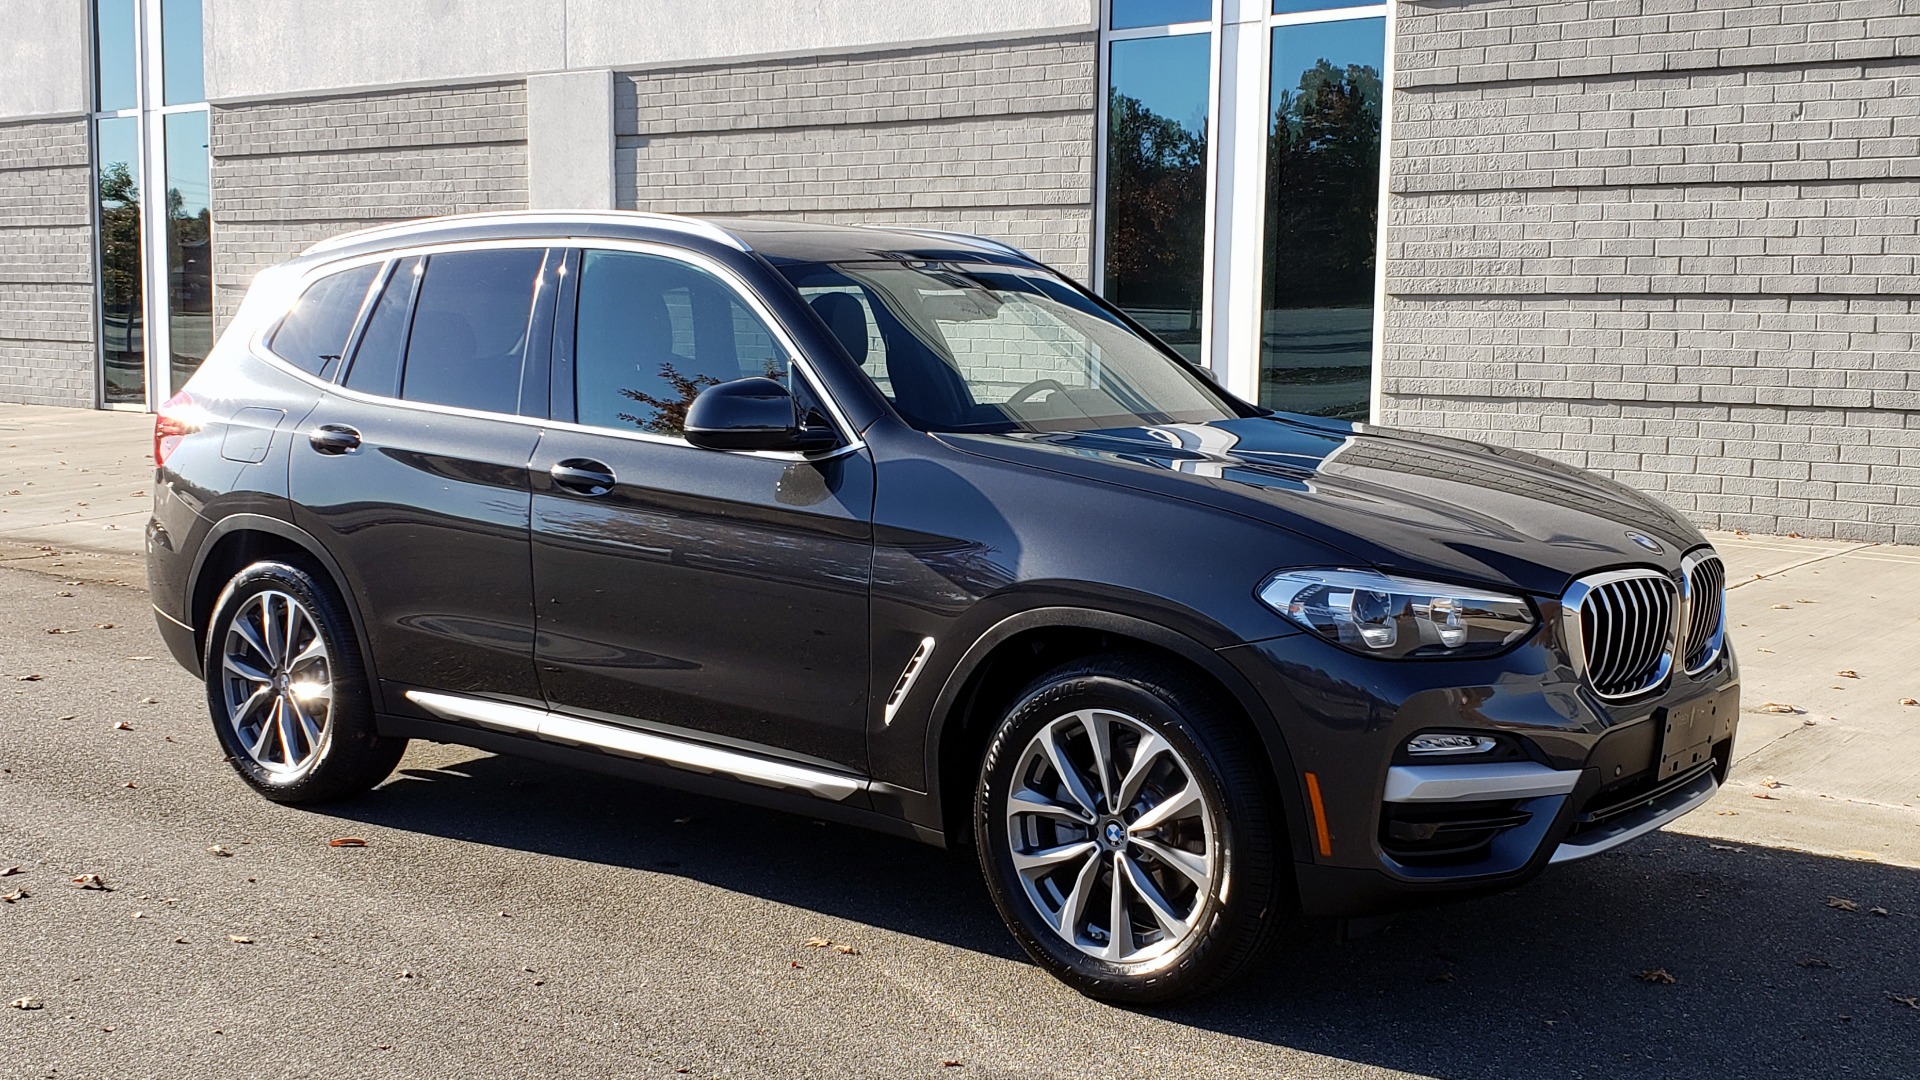 Used 2018 BMW X3 XDRIVE30I / NAV / PARK ASST / PANO-ROOF / HTD STS / REARVIEW for sale Sold at Formula Imports in Charlotte NC 28227 7